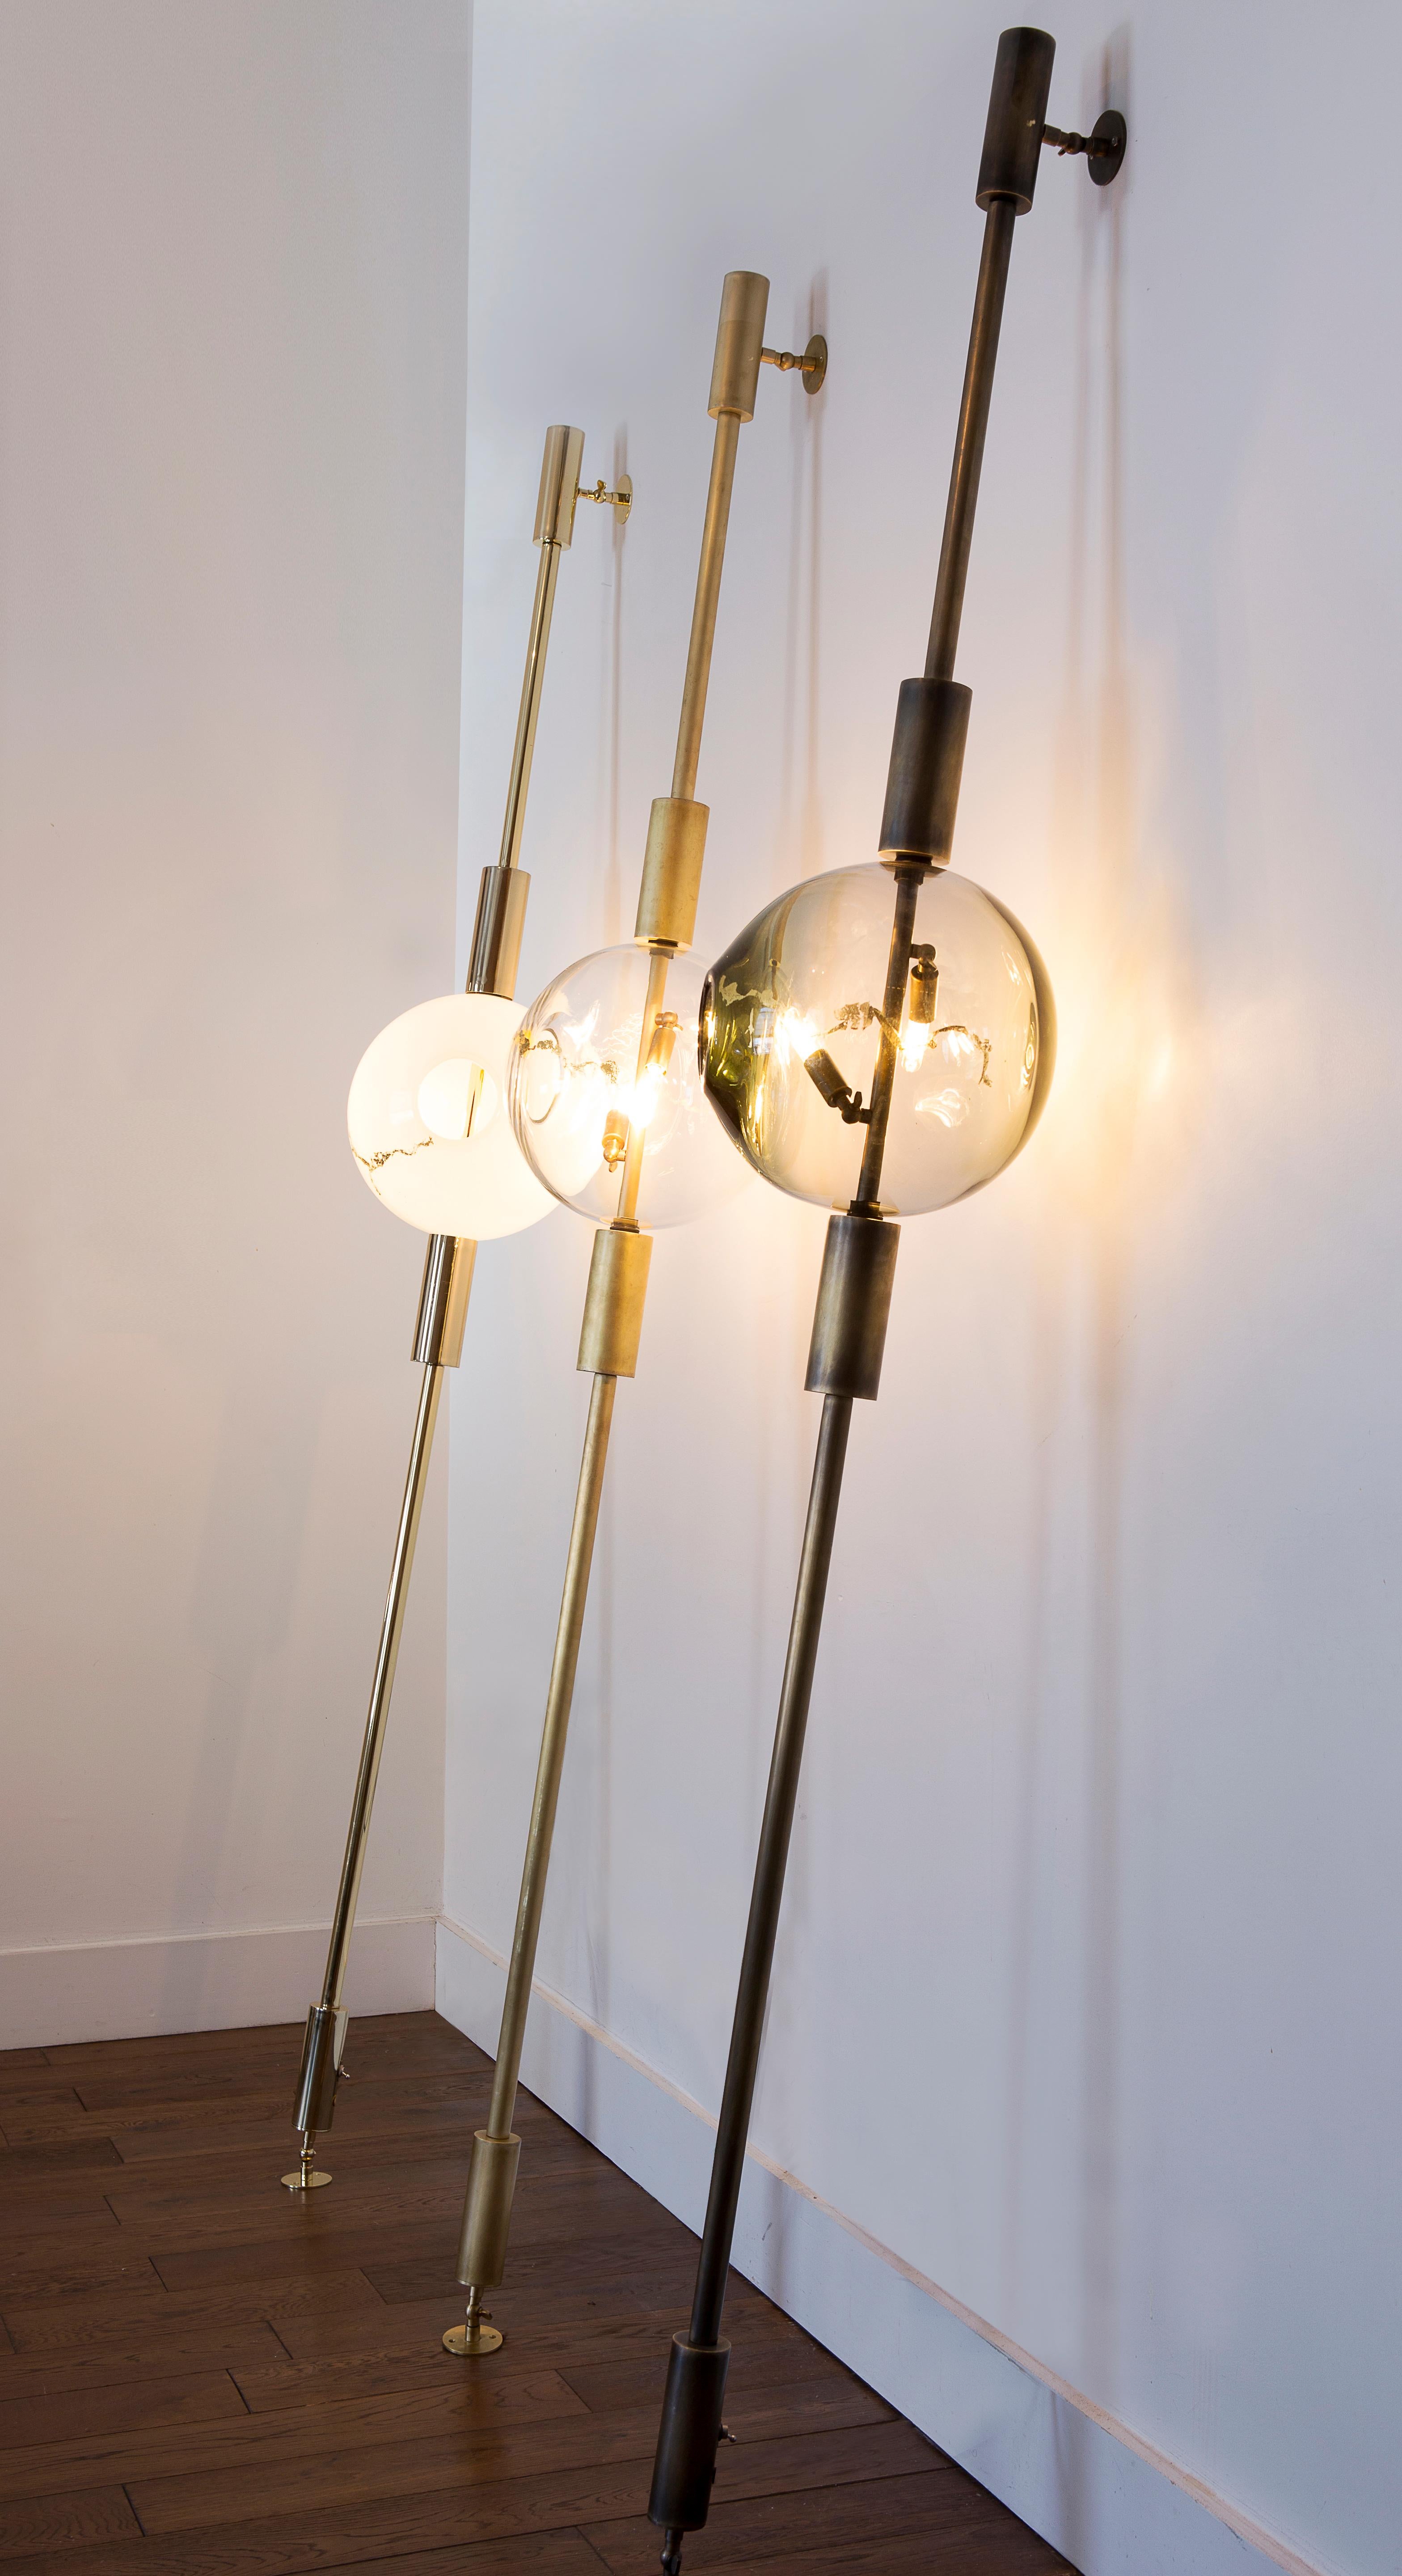 Unique lean light by Ekin Varon
Dimensions: W 30.4 x D 30.4 x H 213.3 cm
Materials: Brass, steel, glass.
Glass color, Metal finish, dimensions can all be customized as our pieces are made-to-order.

Ekin Varon is the founder and creative